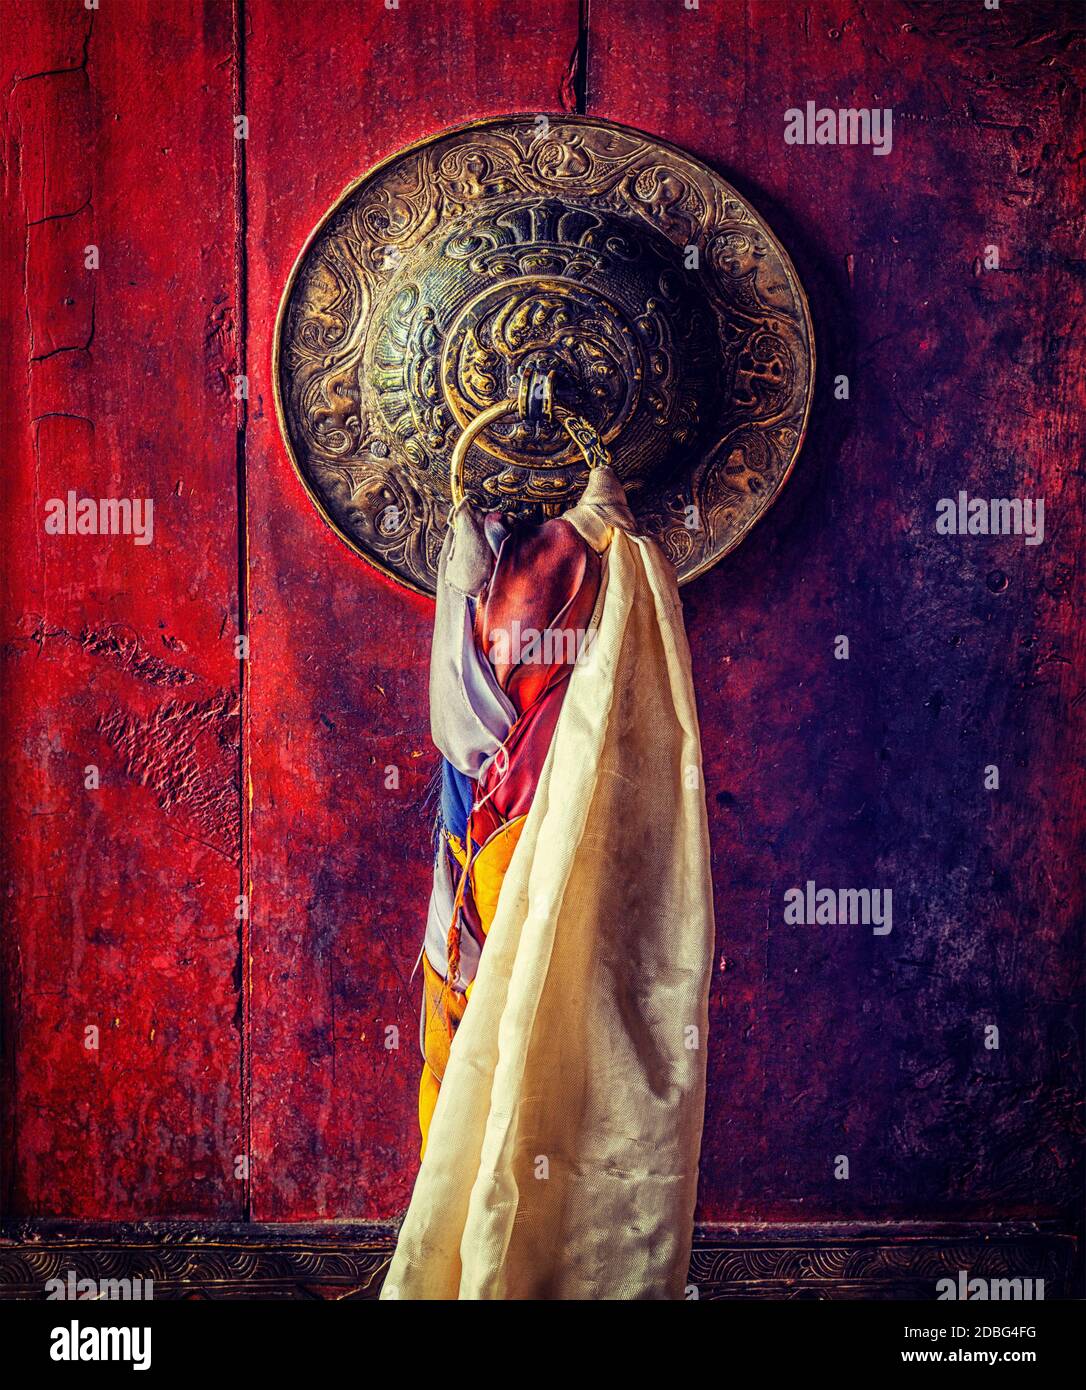 Vintage retro effect filtered hipster style image of door handle of gates of Thiksey gompa (Tibetan Buddhist monastery). Ladakh, India Stock Photo